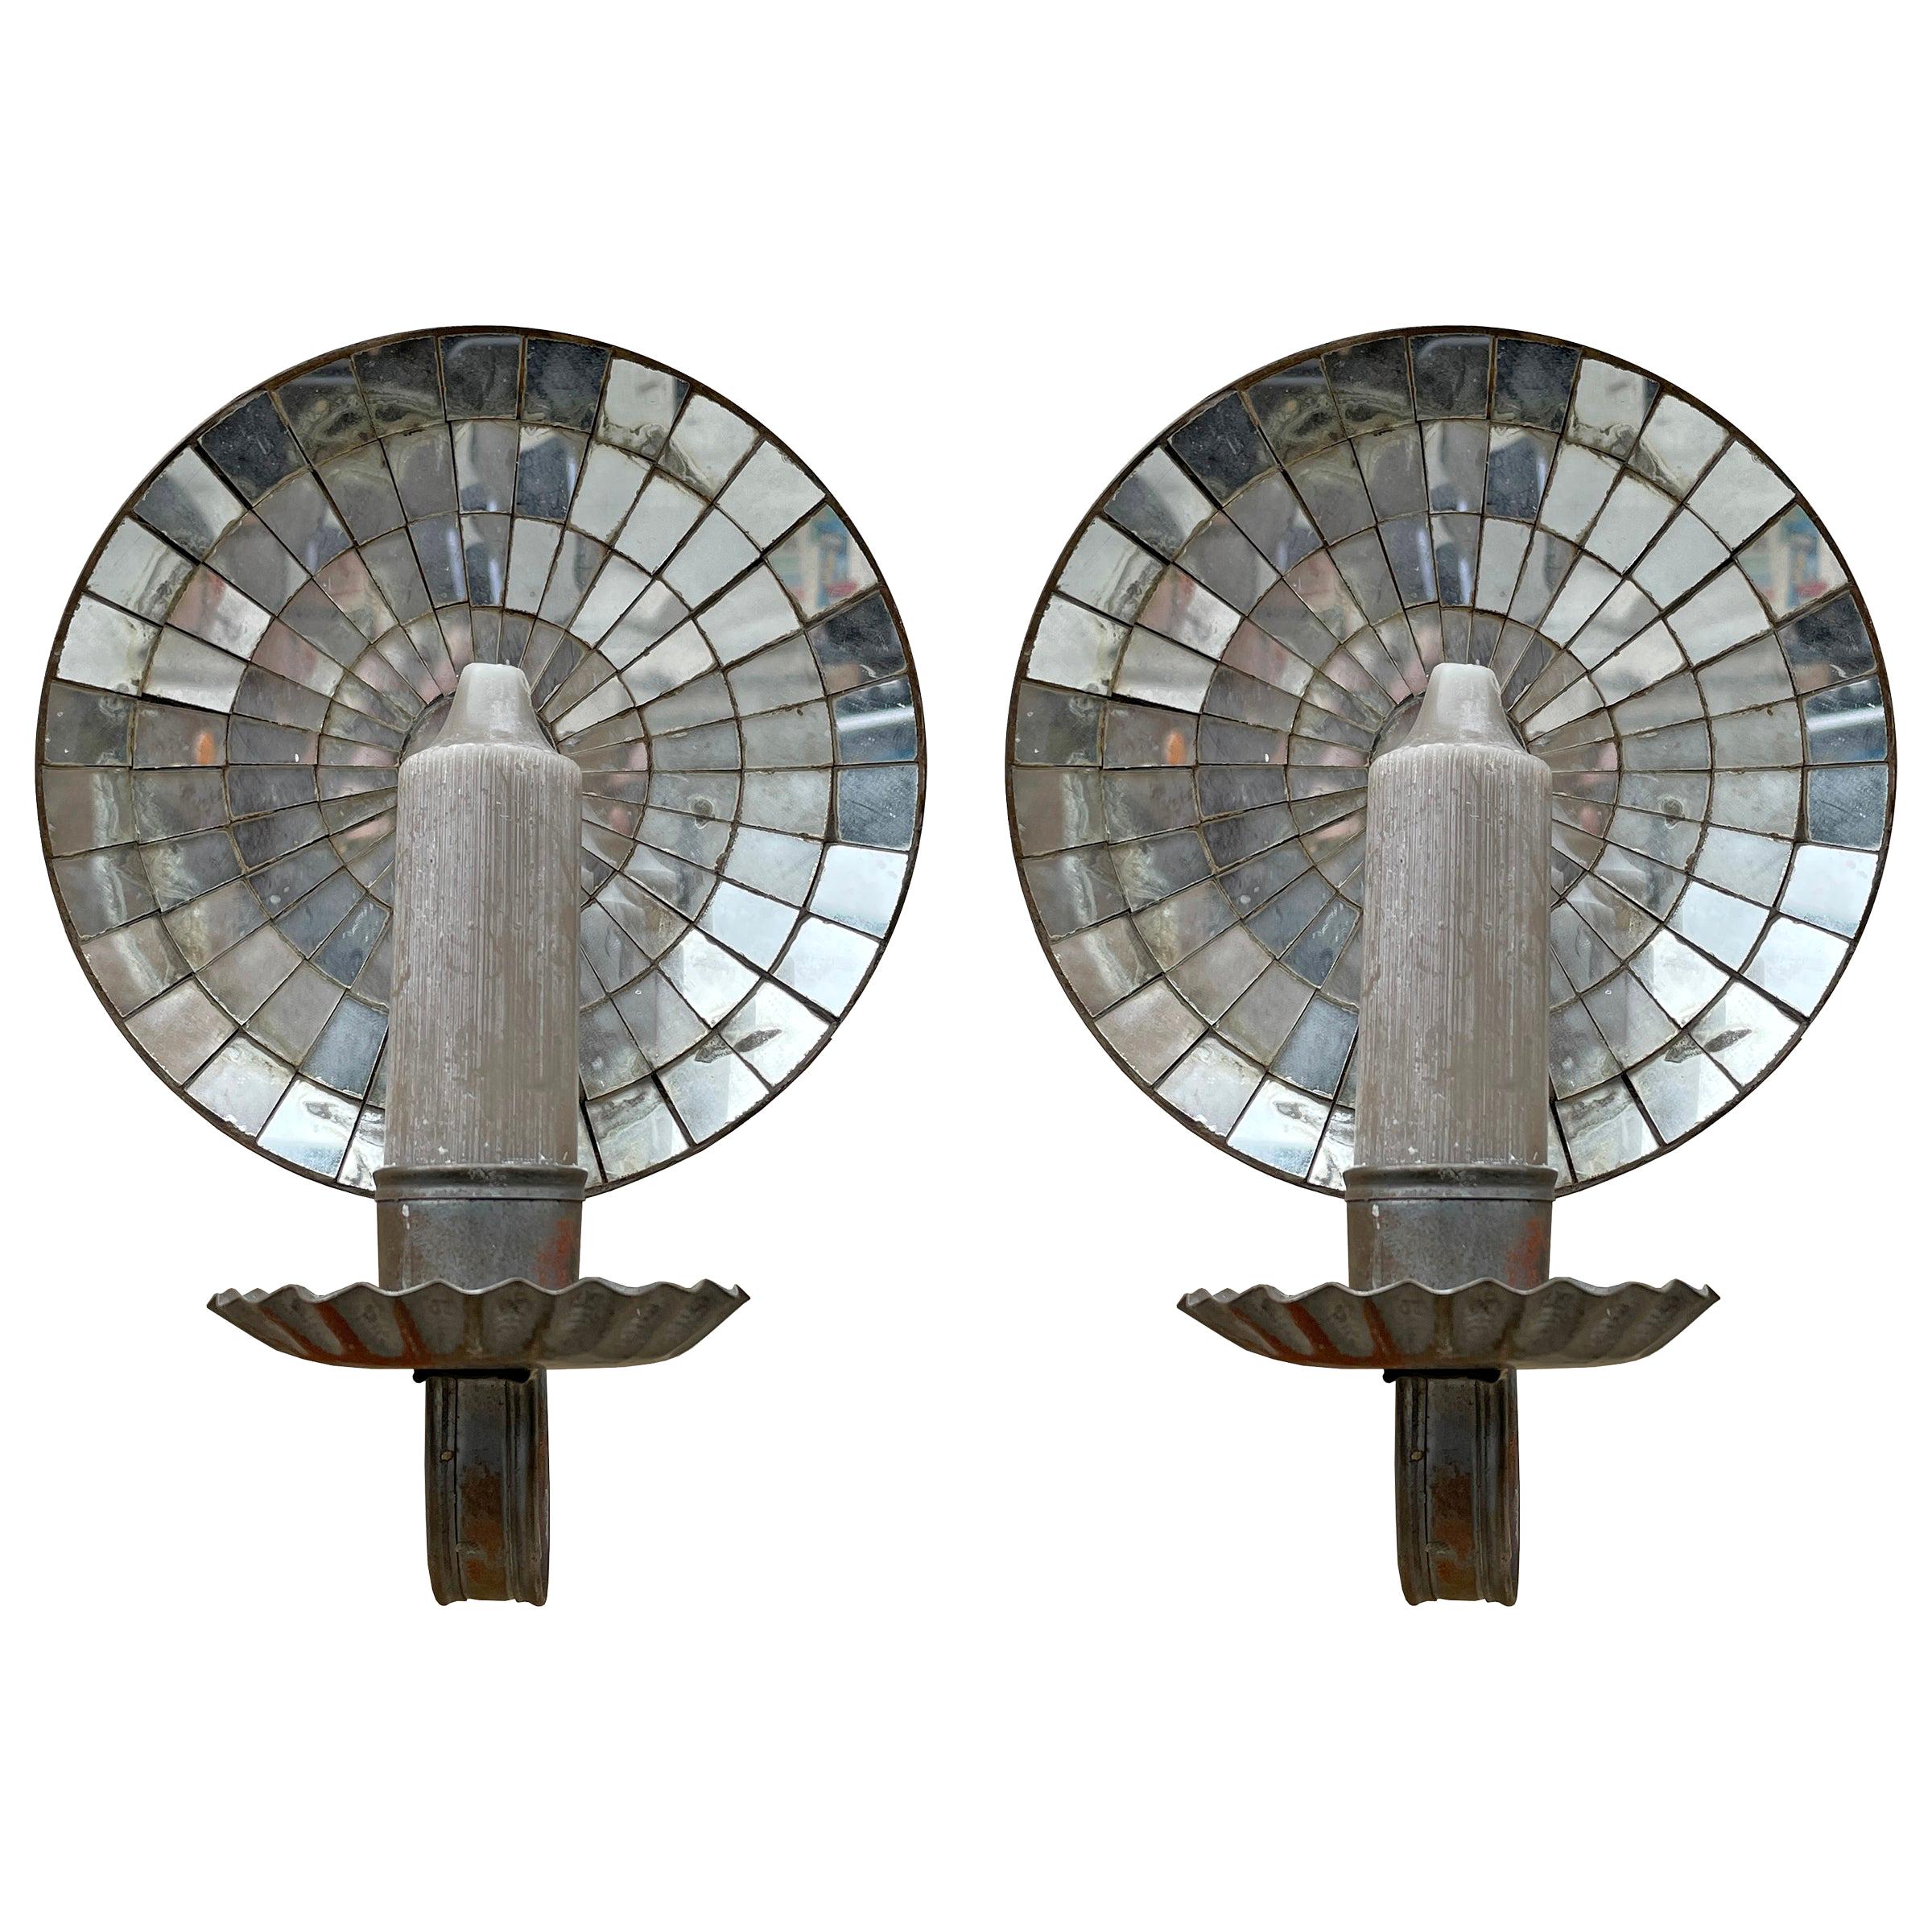 Pair of American Convex Mirrored Candle Sconces